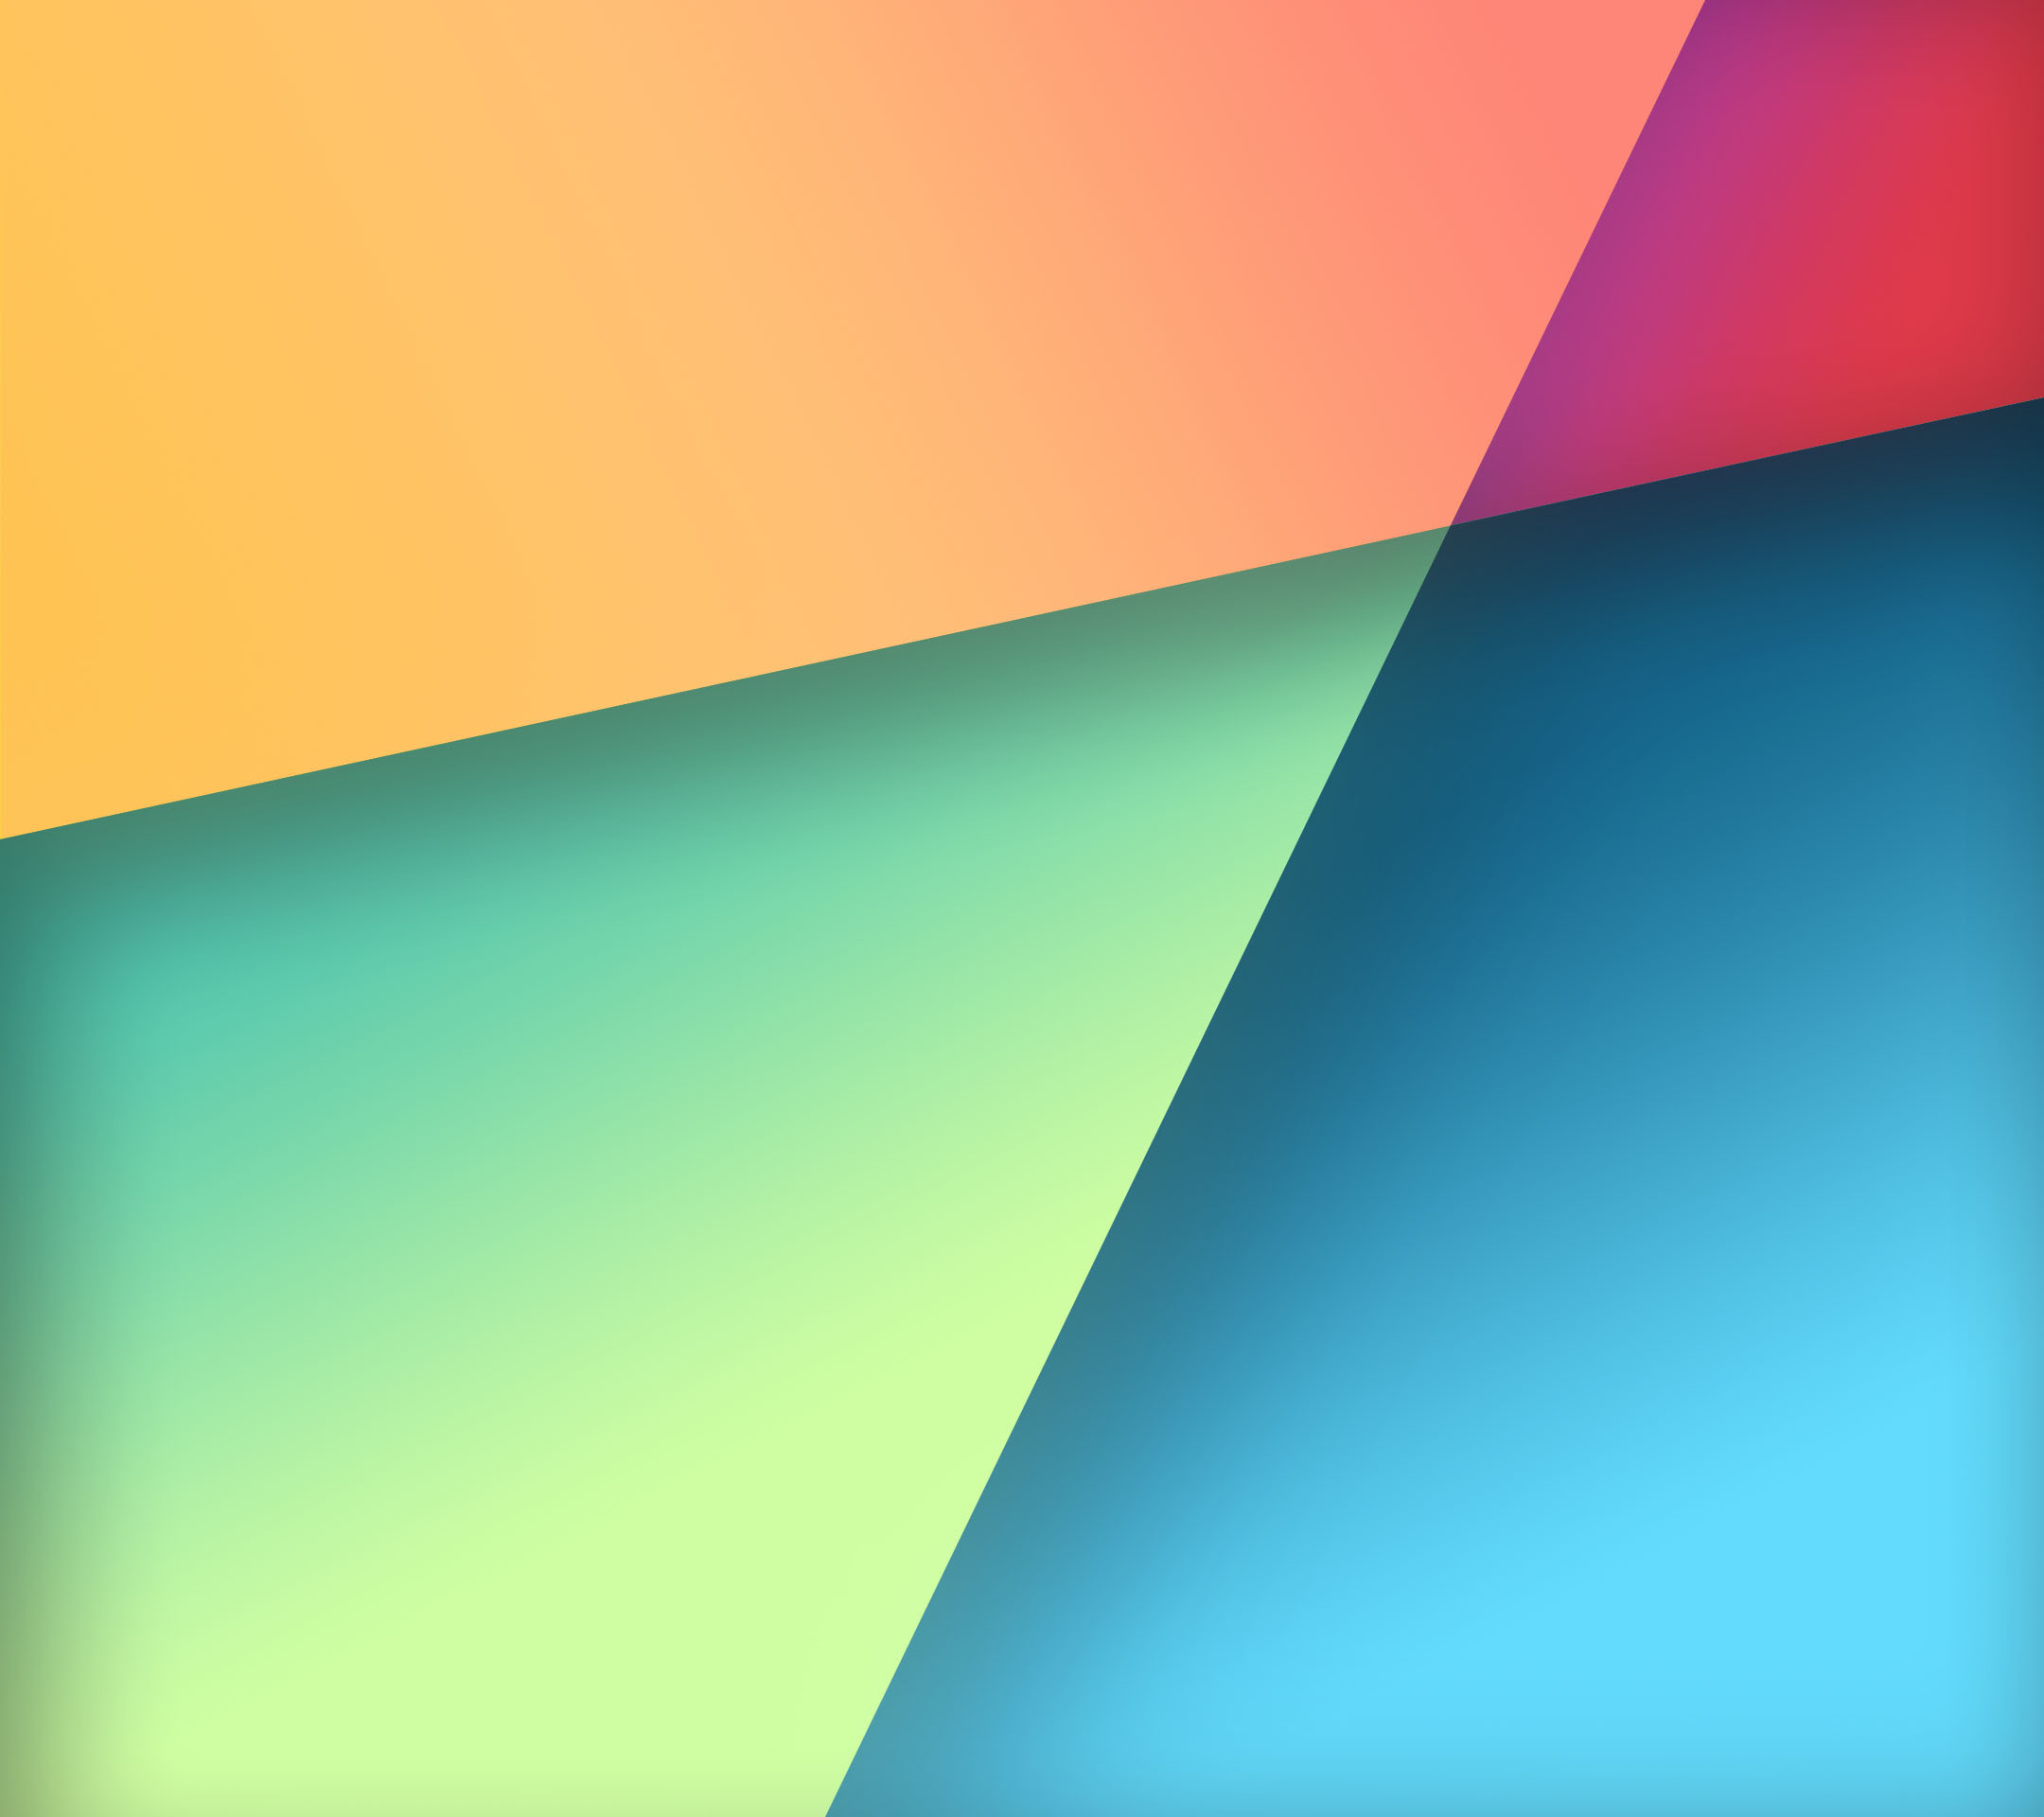 2160x1920 ... Nexus 7 Stock Wallpaper in Google Play Colors by R3CONN3R